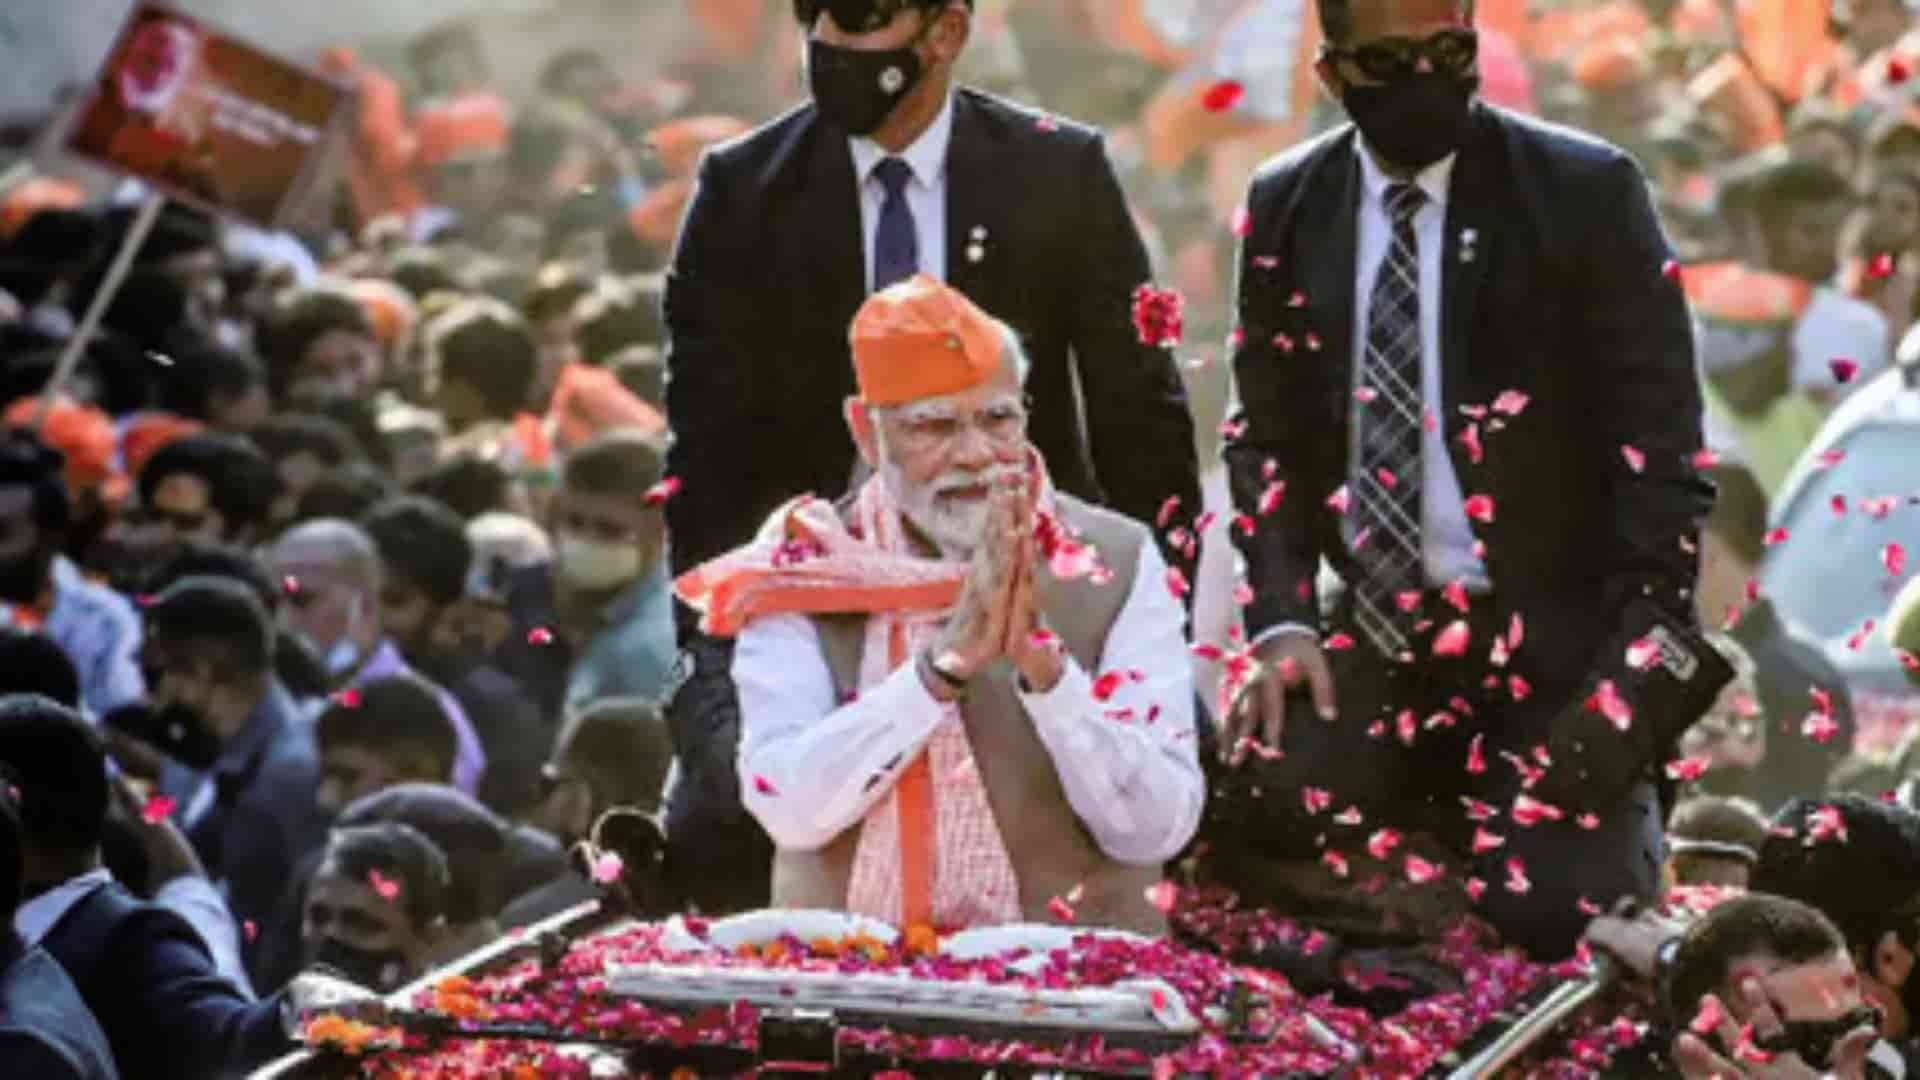 PM Modi Shares AI Video Of Himself Grooving On A Bollywood Song; Calls It ‘Truly Delightful’